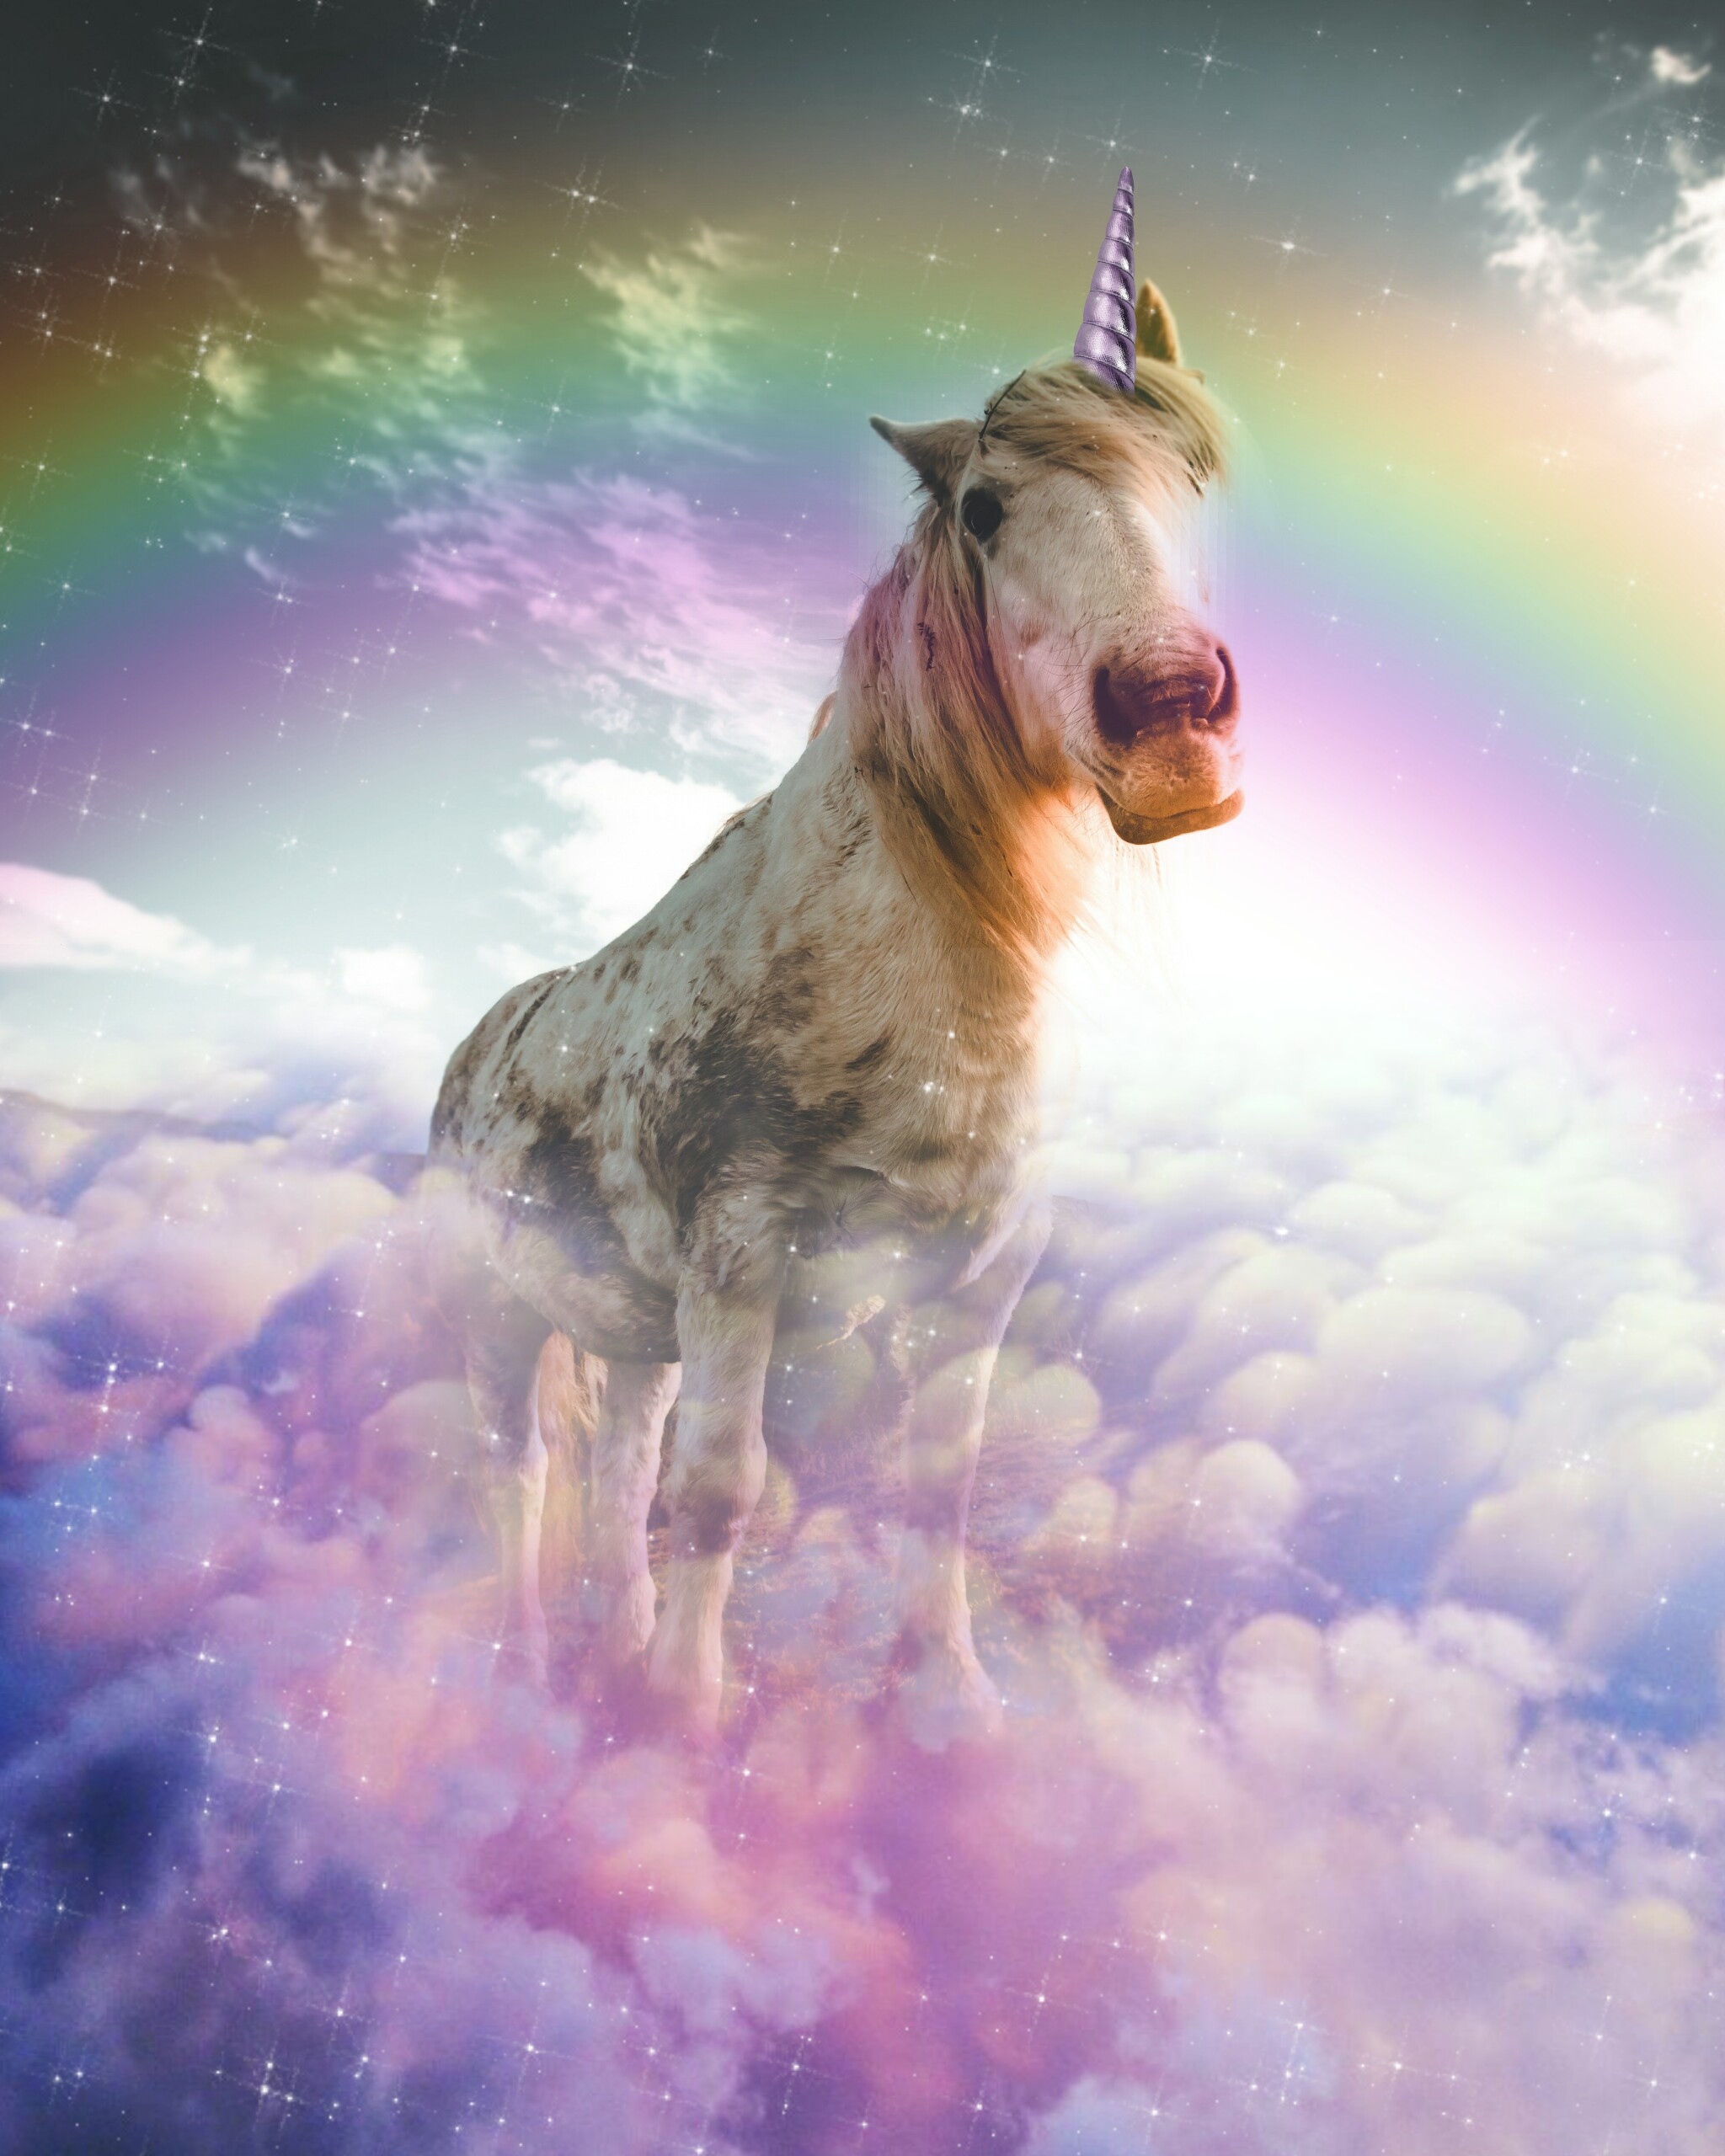 Unicorn wallpapers download